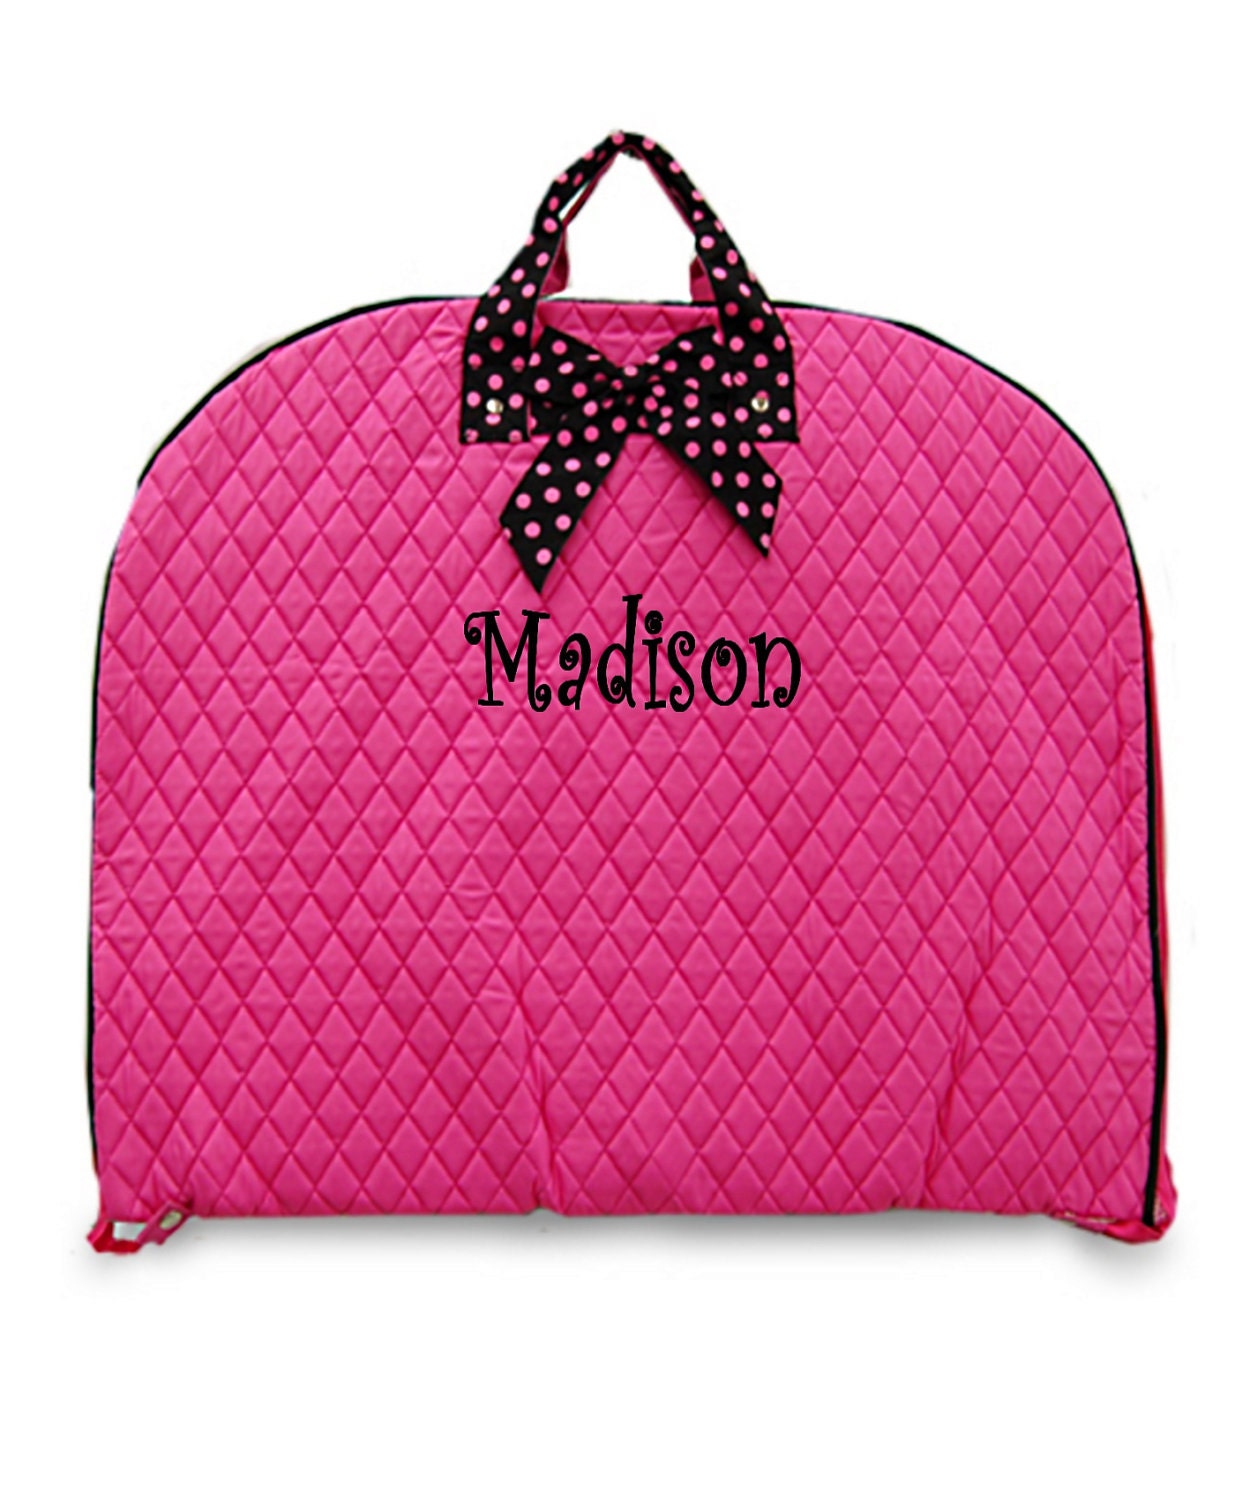 Personalized Girls Garment Bag great for Dance Recital or